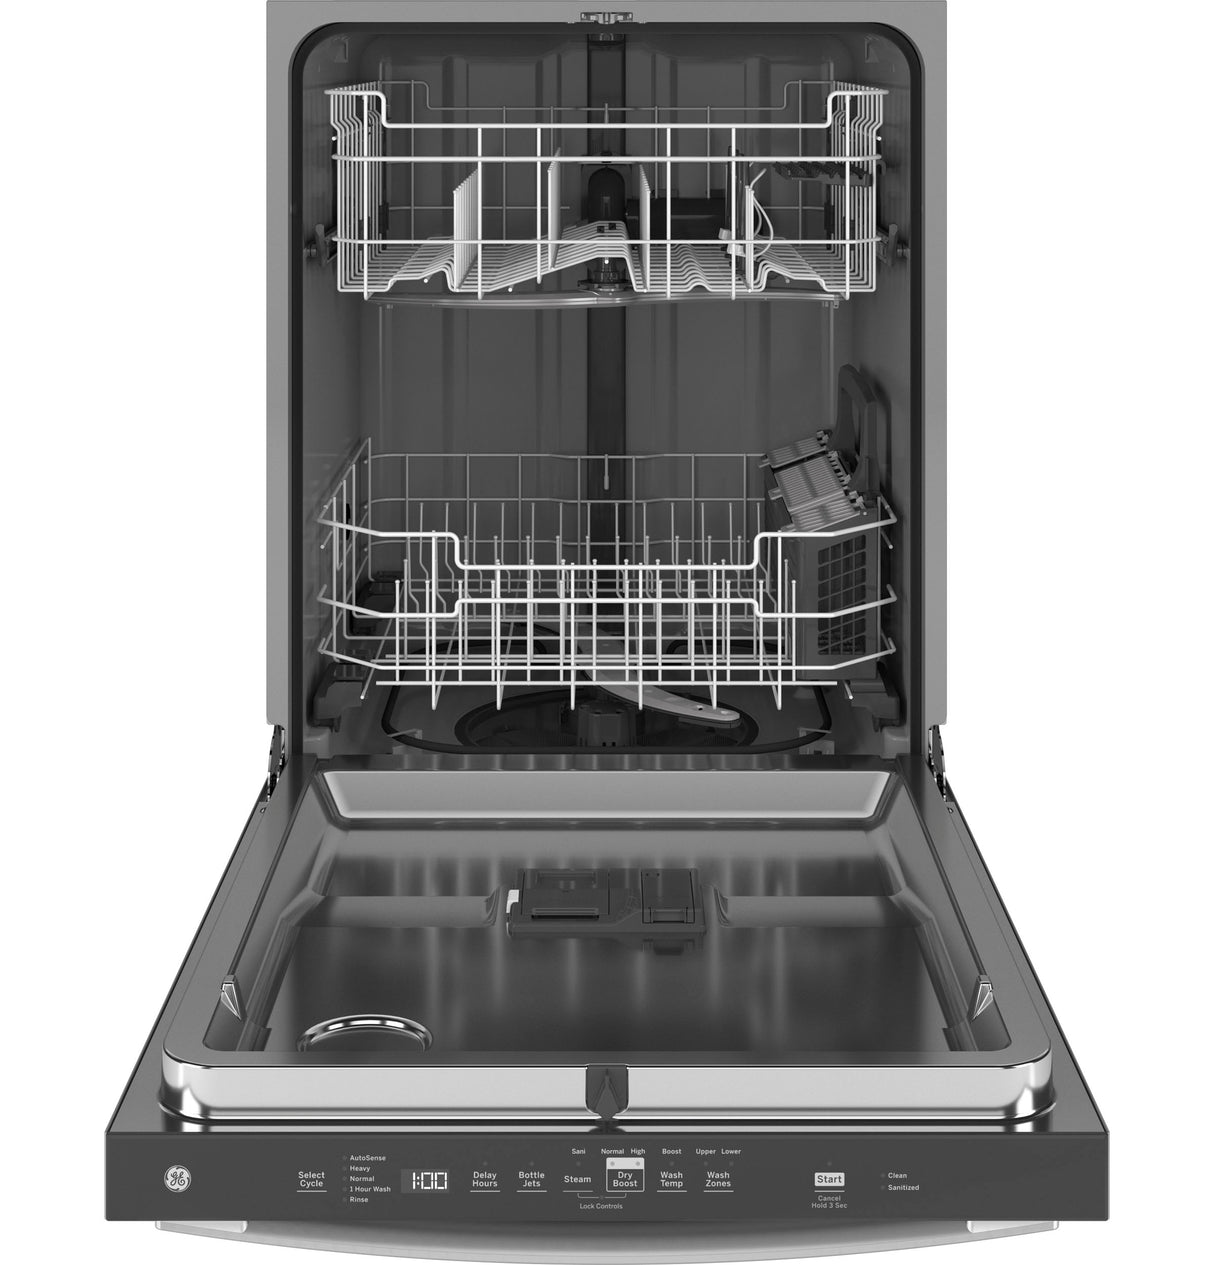 GE(R) ENERGY STAR(R) Top Control with Stainless Steel Interior Door Dishwasher with Sanitize Cycle & Dry Boost - (GDT635HSRSS)